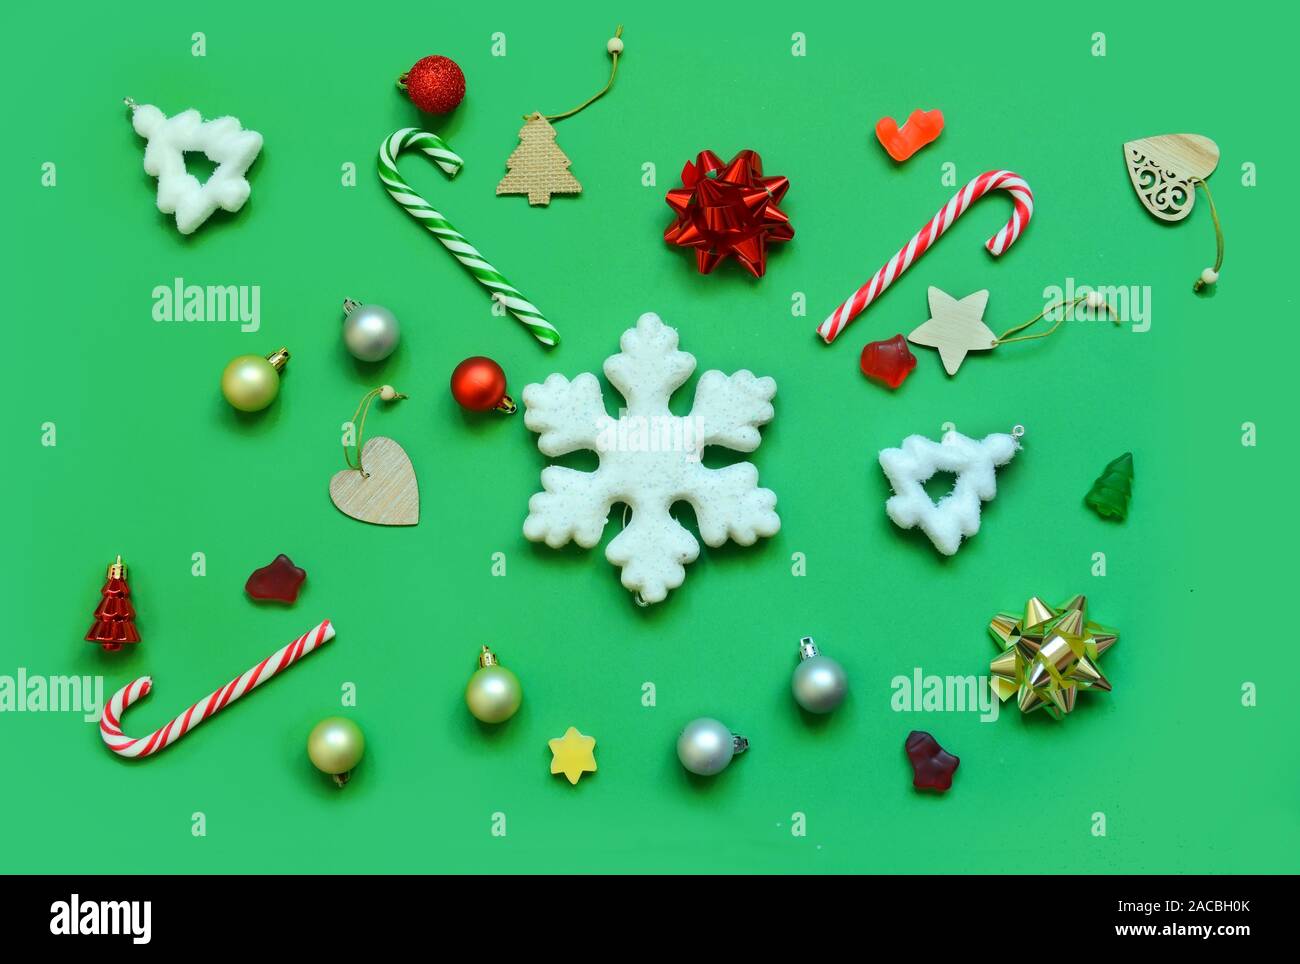 Christmas decorative creative background with various Christmas objects Stock Photo